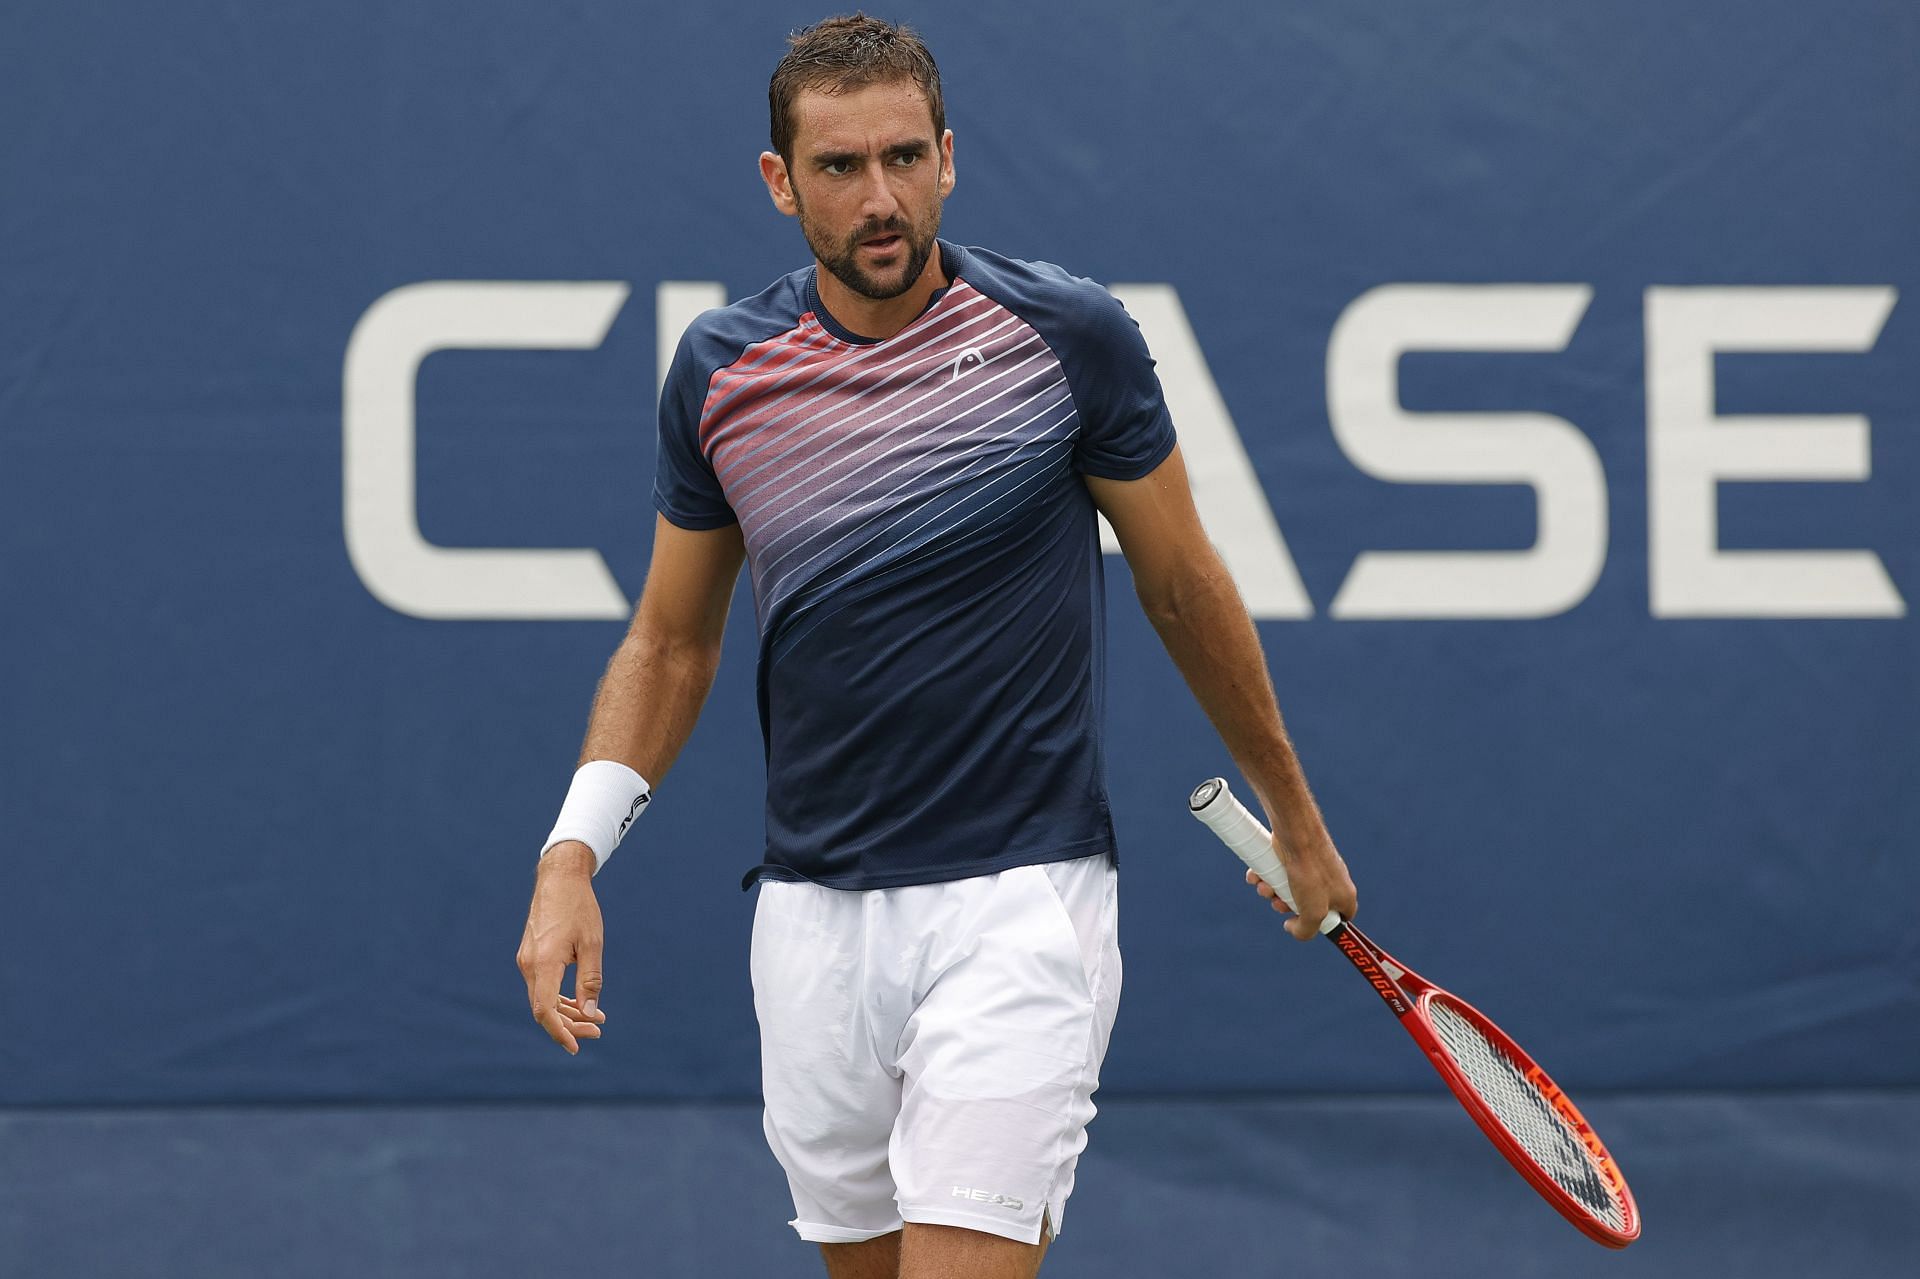 Cilic in action at the 2021 US Open.